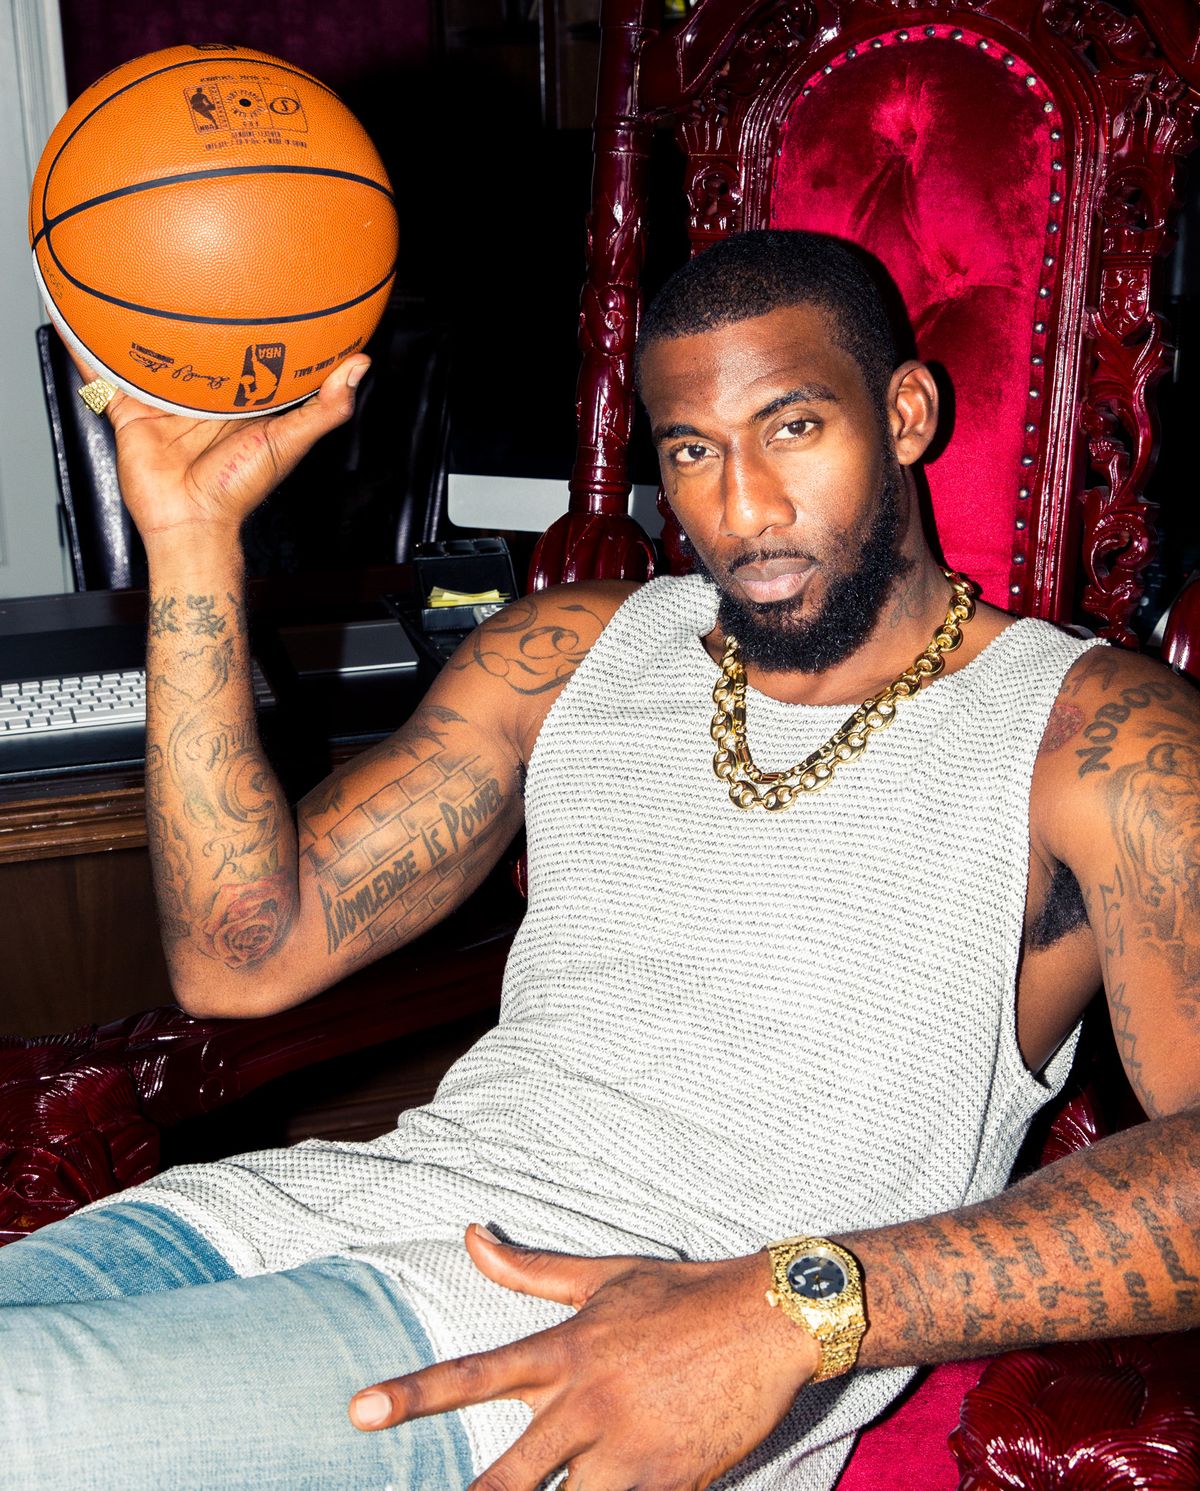 Amar’e Stoudemire’s Closet Is Full of Rare Sneakers and One-of-a-Kind Jackets